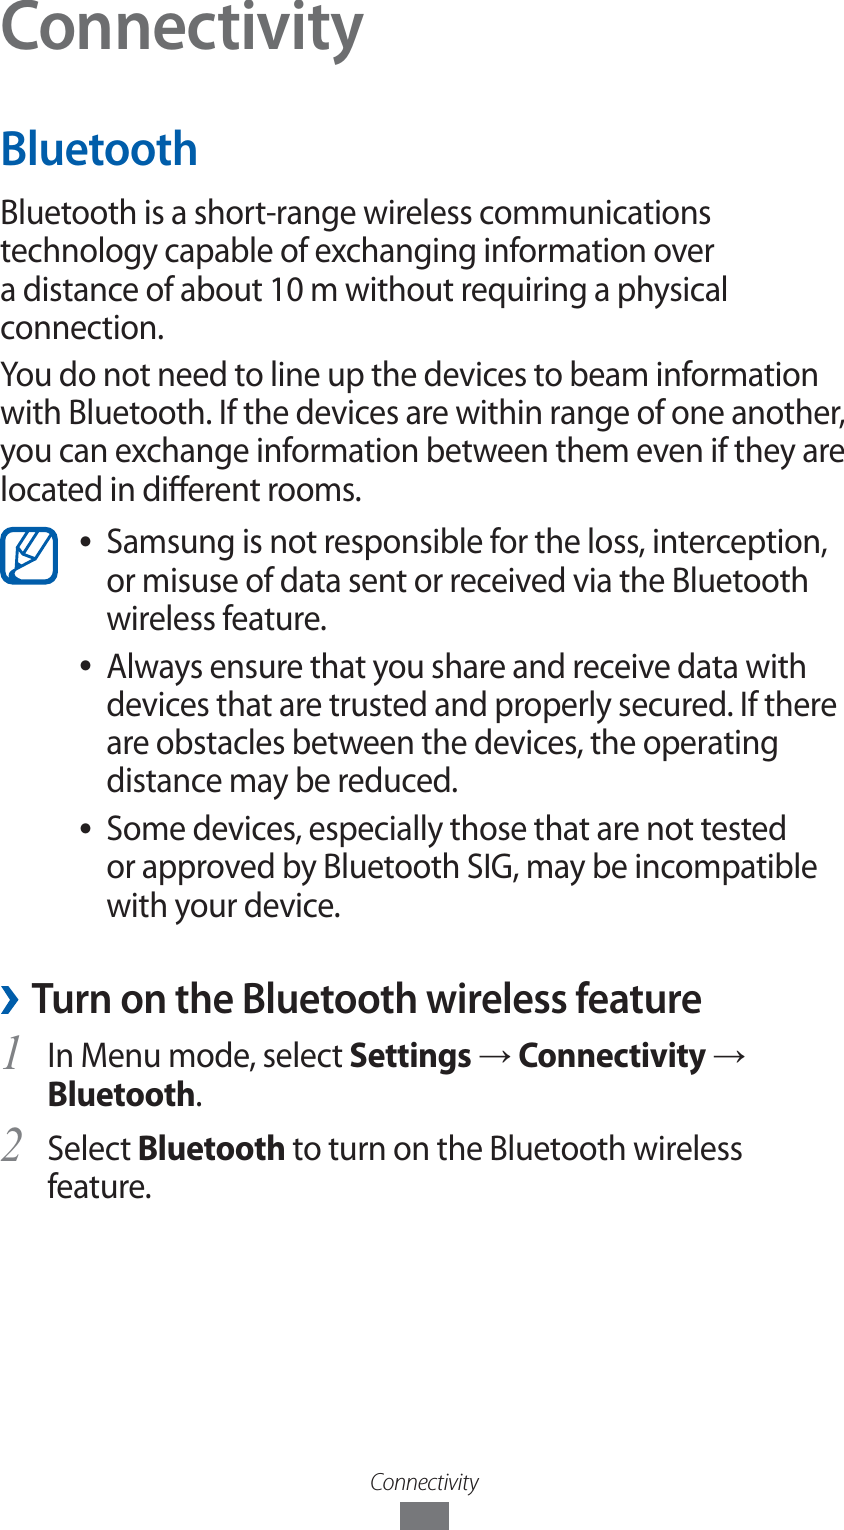 ConnectivityConnectivityBluetoothBluetooth is a short-range wireless communications technology capable of exchanging information over a distance of about 10 m without requiring a physical connection.You do not need to line up the devices to beam information with Bluetooth. If the devices are within range of one another, you can exchange information between them even if they are located in dierent rooms.Samsung is not responsible for the loss, interception,  ●or misuse of data sent or received via the Bluetooth wireless feature. Always ensure that you share and receive data with  ●devices that are trusted and properly secured. If there are obstacles between the devices, the operating distance may be reduced.Some devices, especially those that are not tested  ●or approved by Bluetooth SIG, may be incompatible with your device. ›Turn on the Bluetooth wireless featureIn Menu mode, select 1 Settings → Connectivity → Bluetooth.Select 2 Bluetooth to turn on the Bluetooth wireless feature.